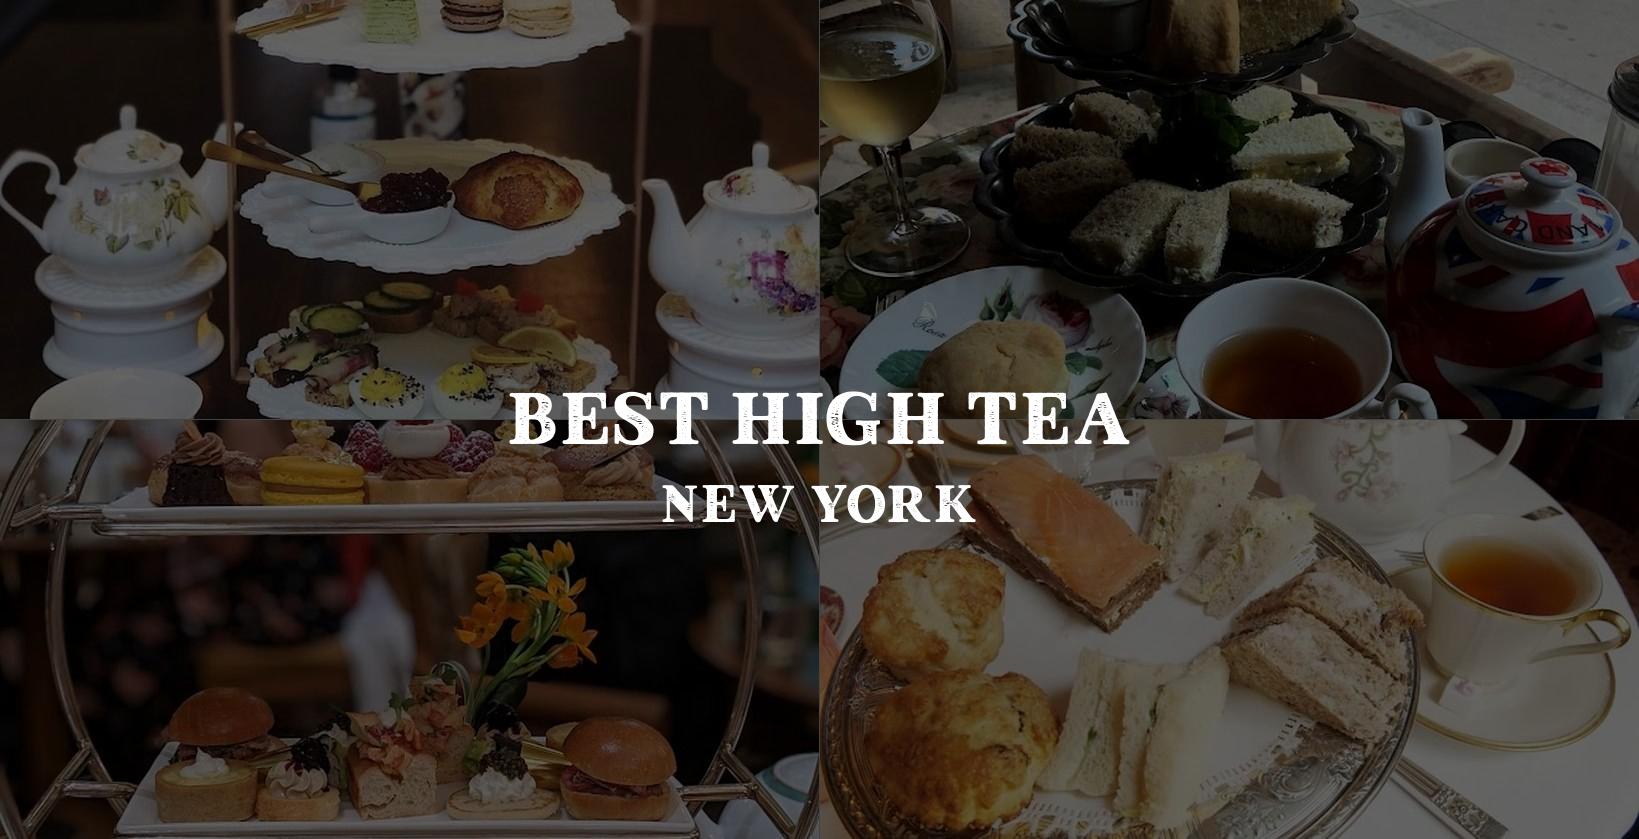 Choosing the perfect spot for High Tea in New York